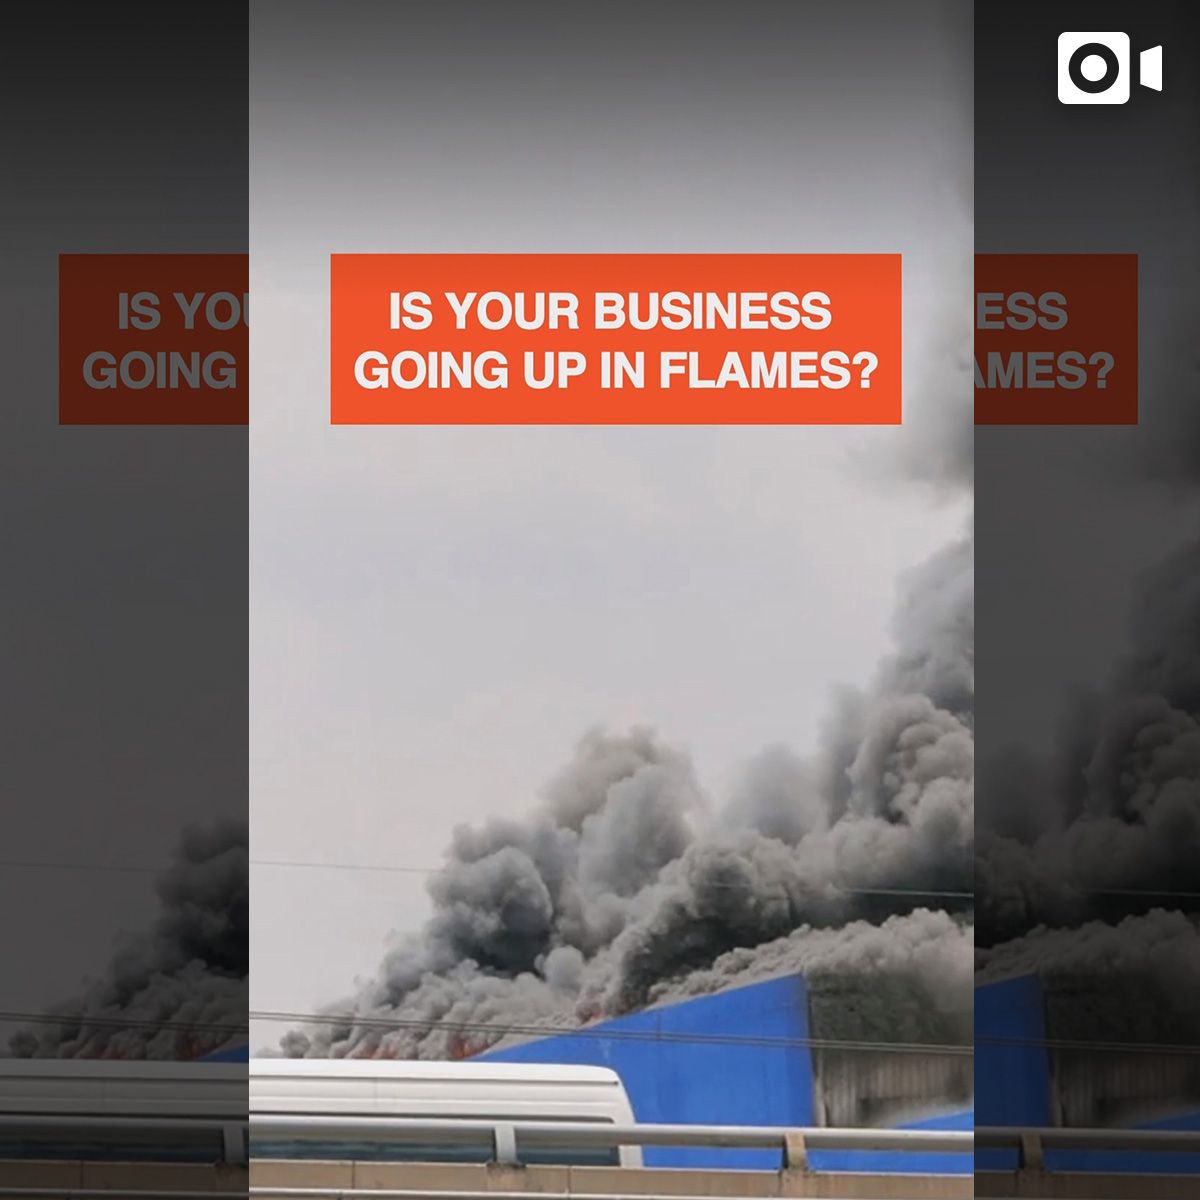 Is your business going up in flames?